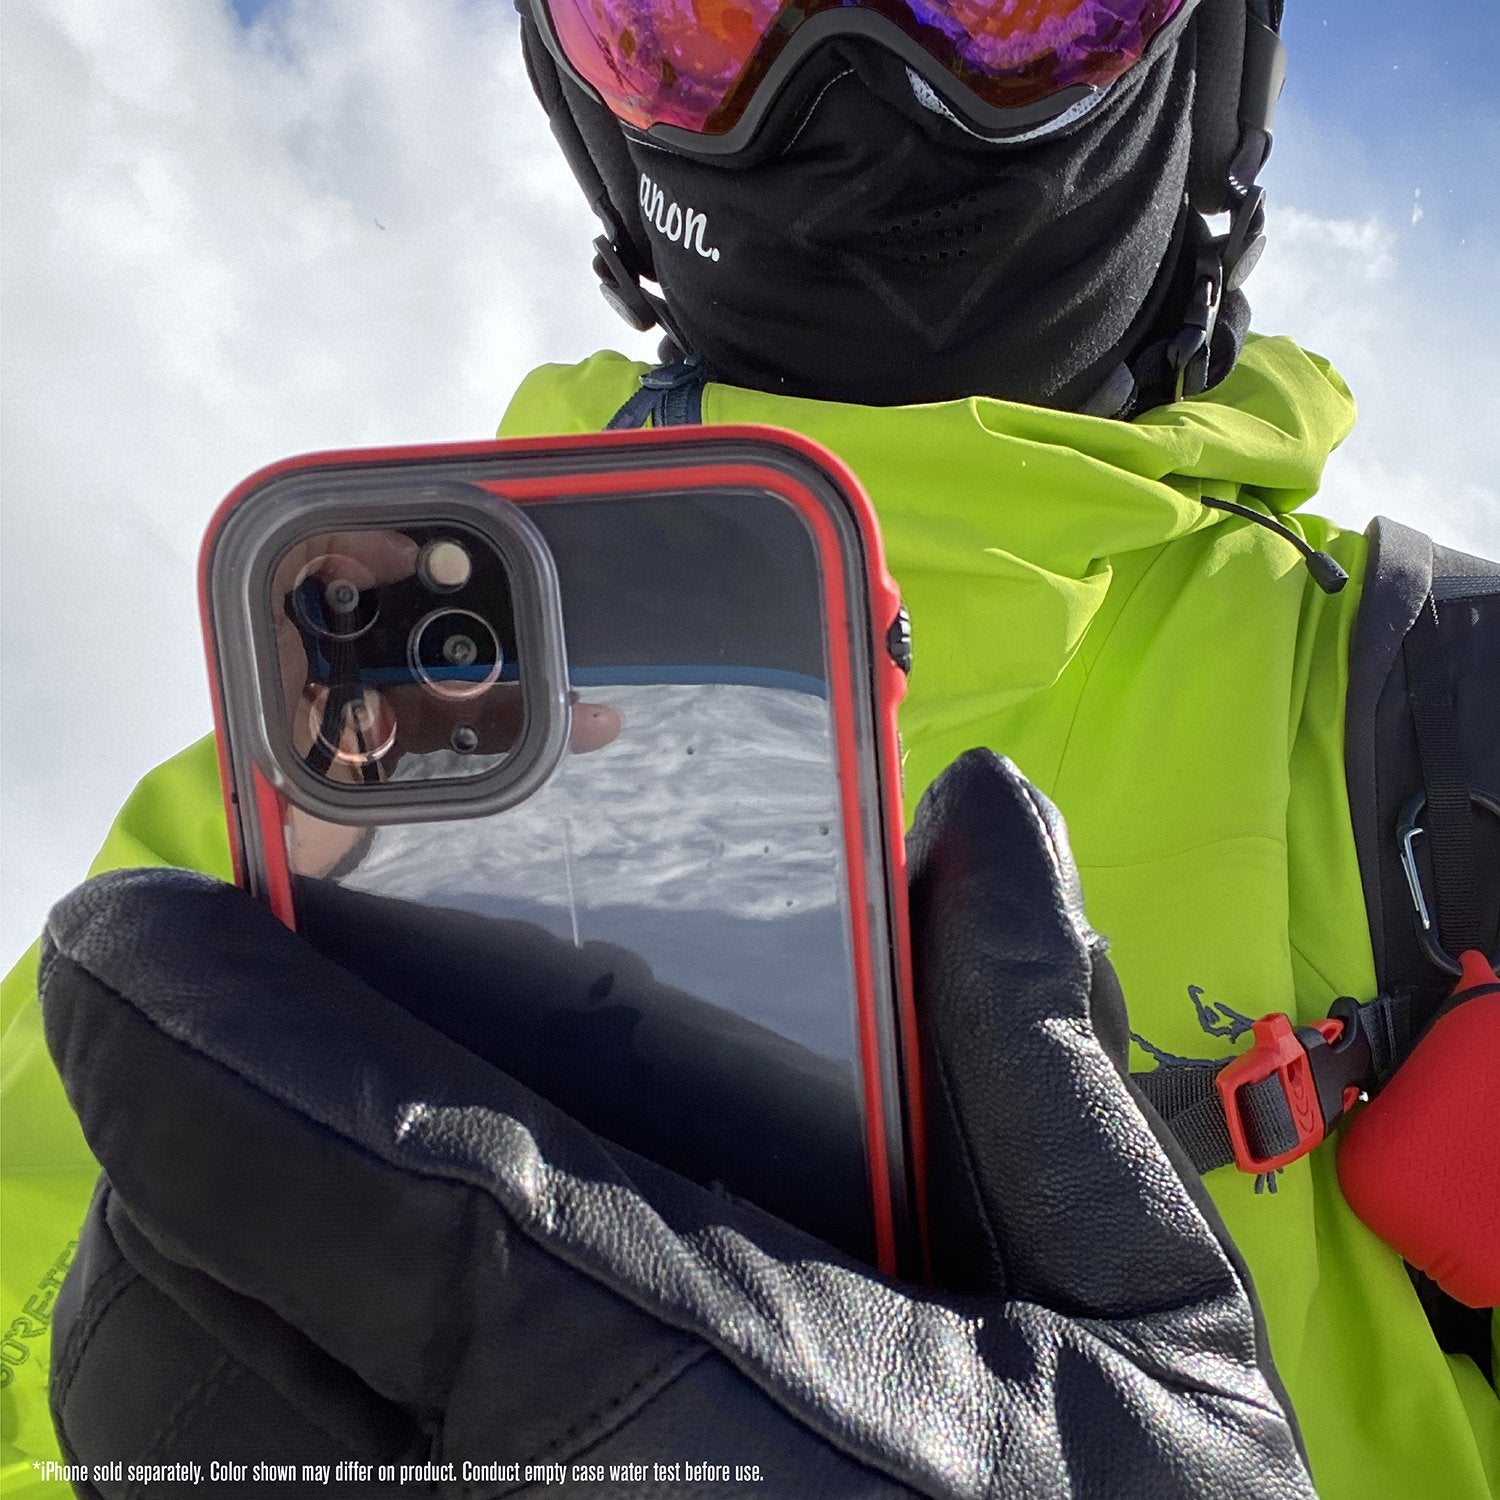  Catalyst iphone 11 pro max waterproof case showing the man holding the phone with case in flame red